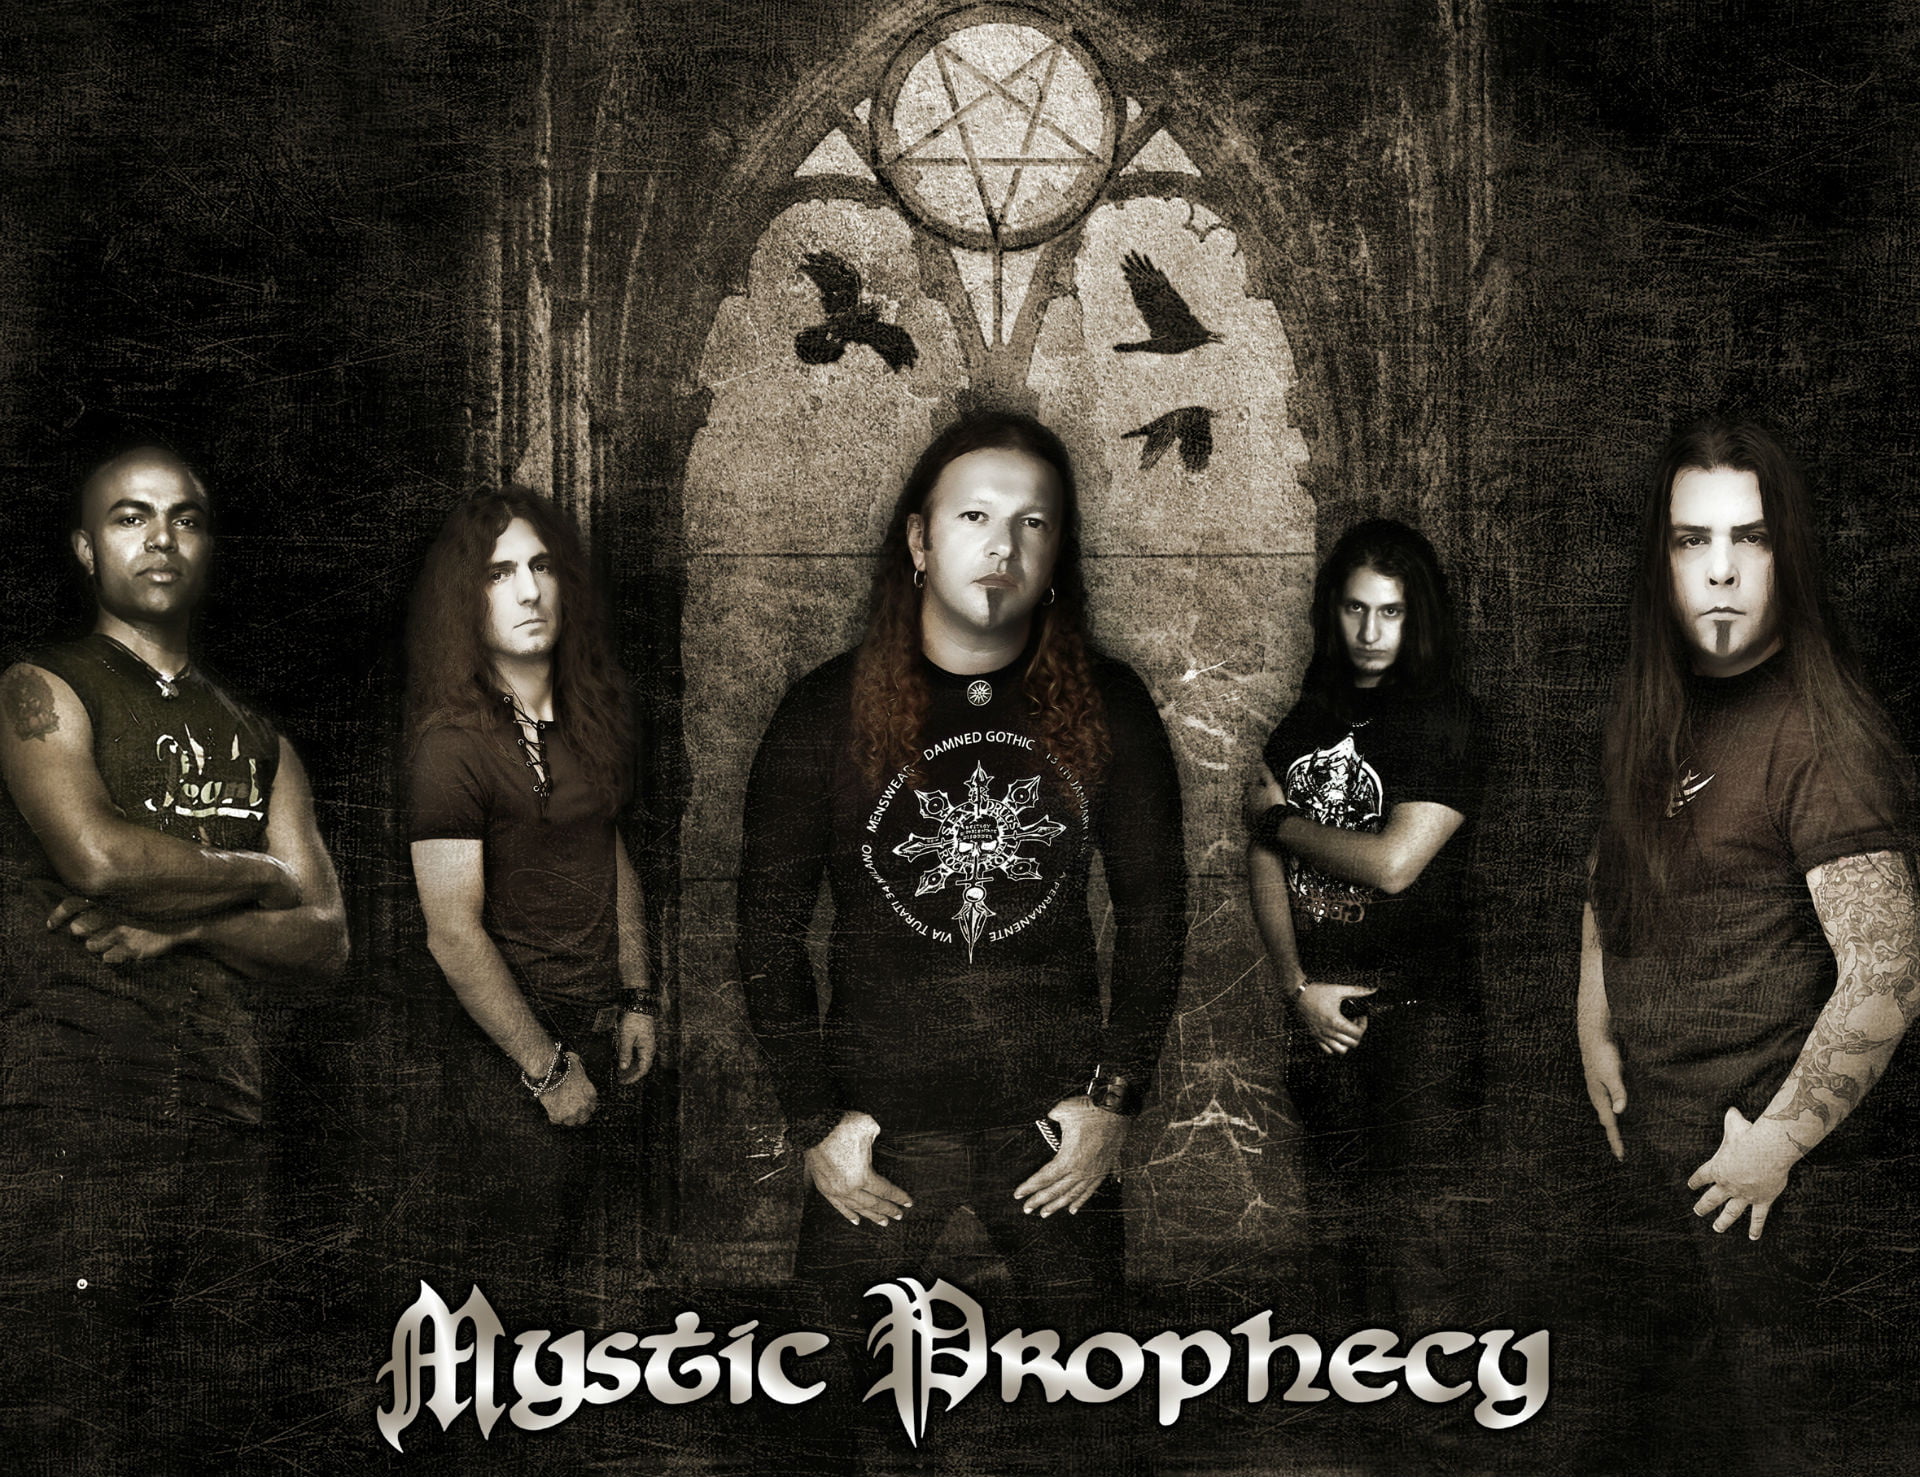 heavy, metal, mystic, power, prophecy, looking at camera, women